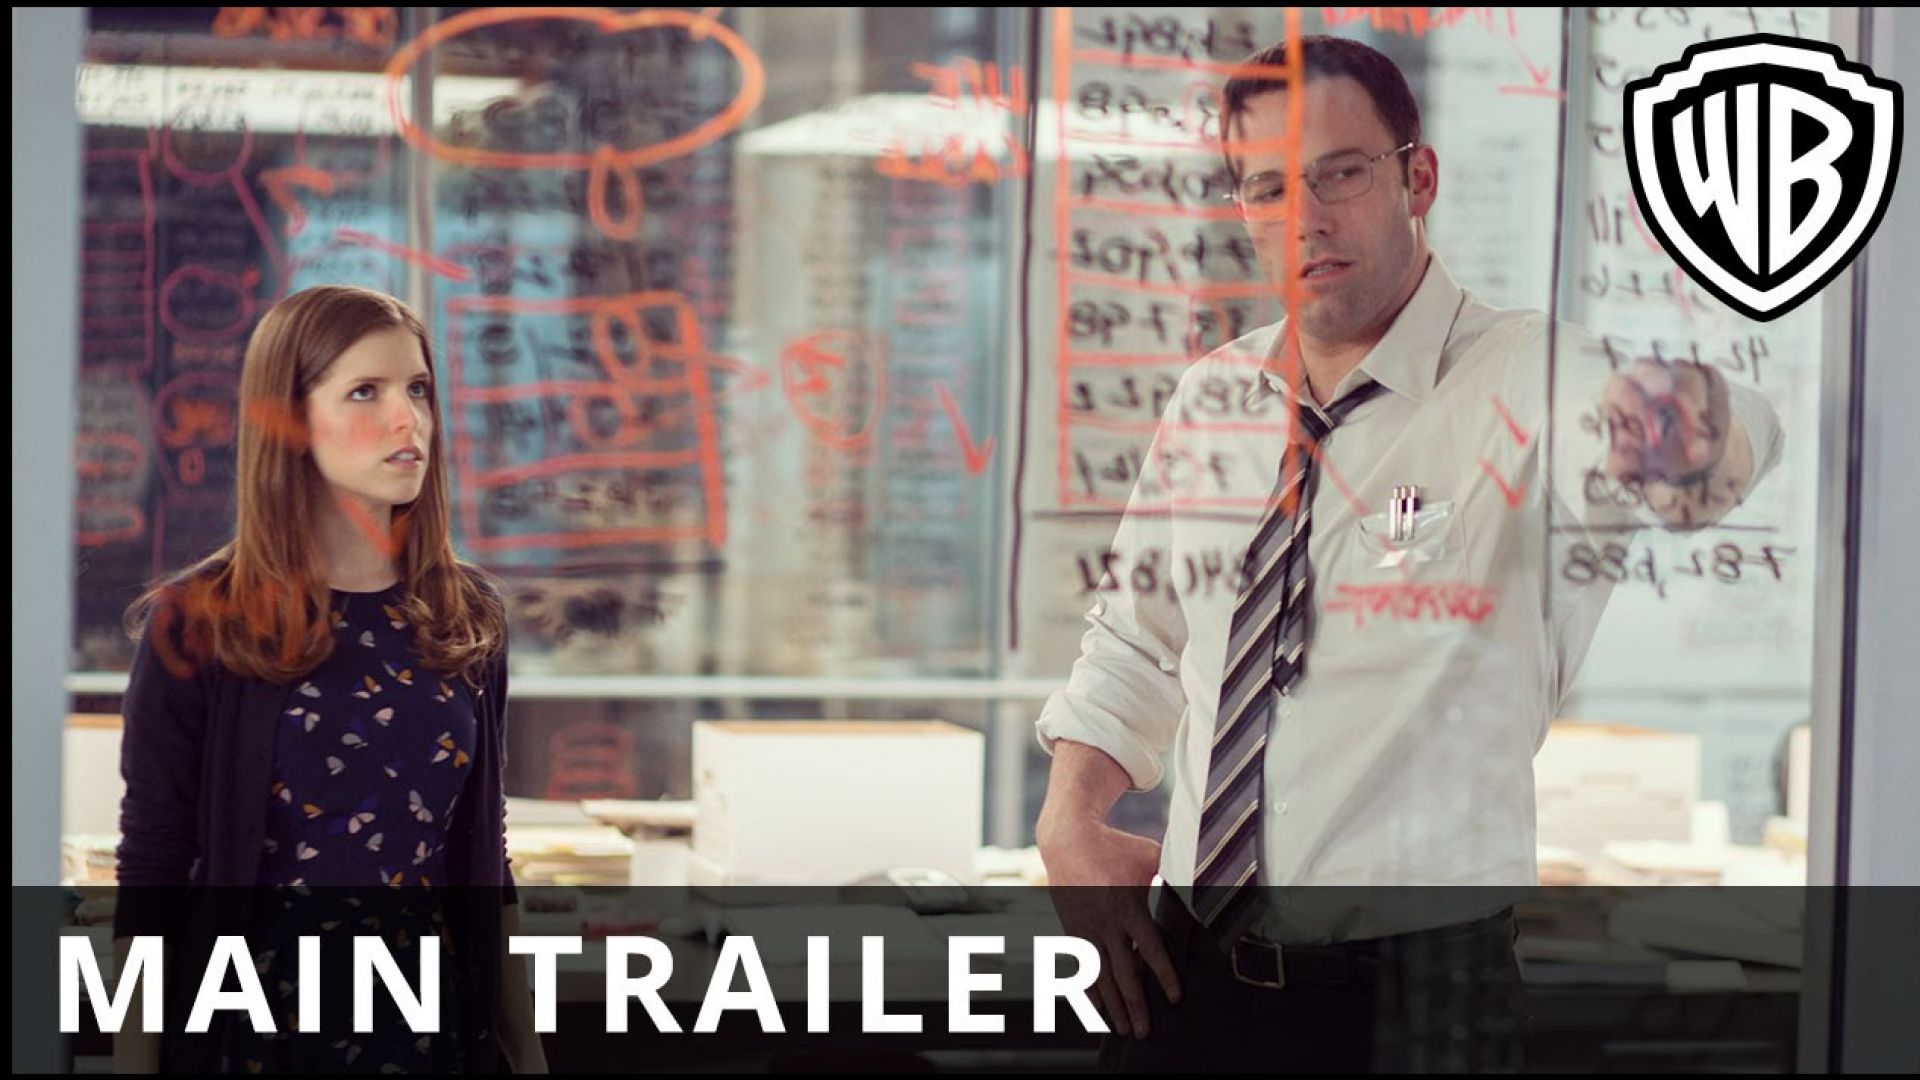 Ben Affleck Is &#039;The Accountant&#039; in this newly released trail